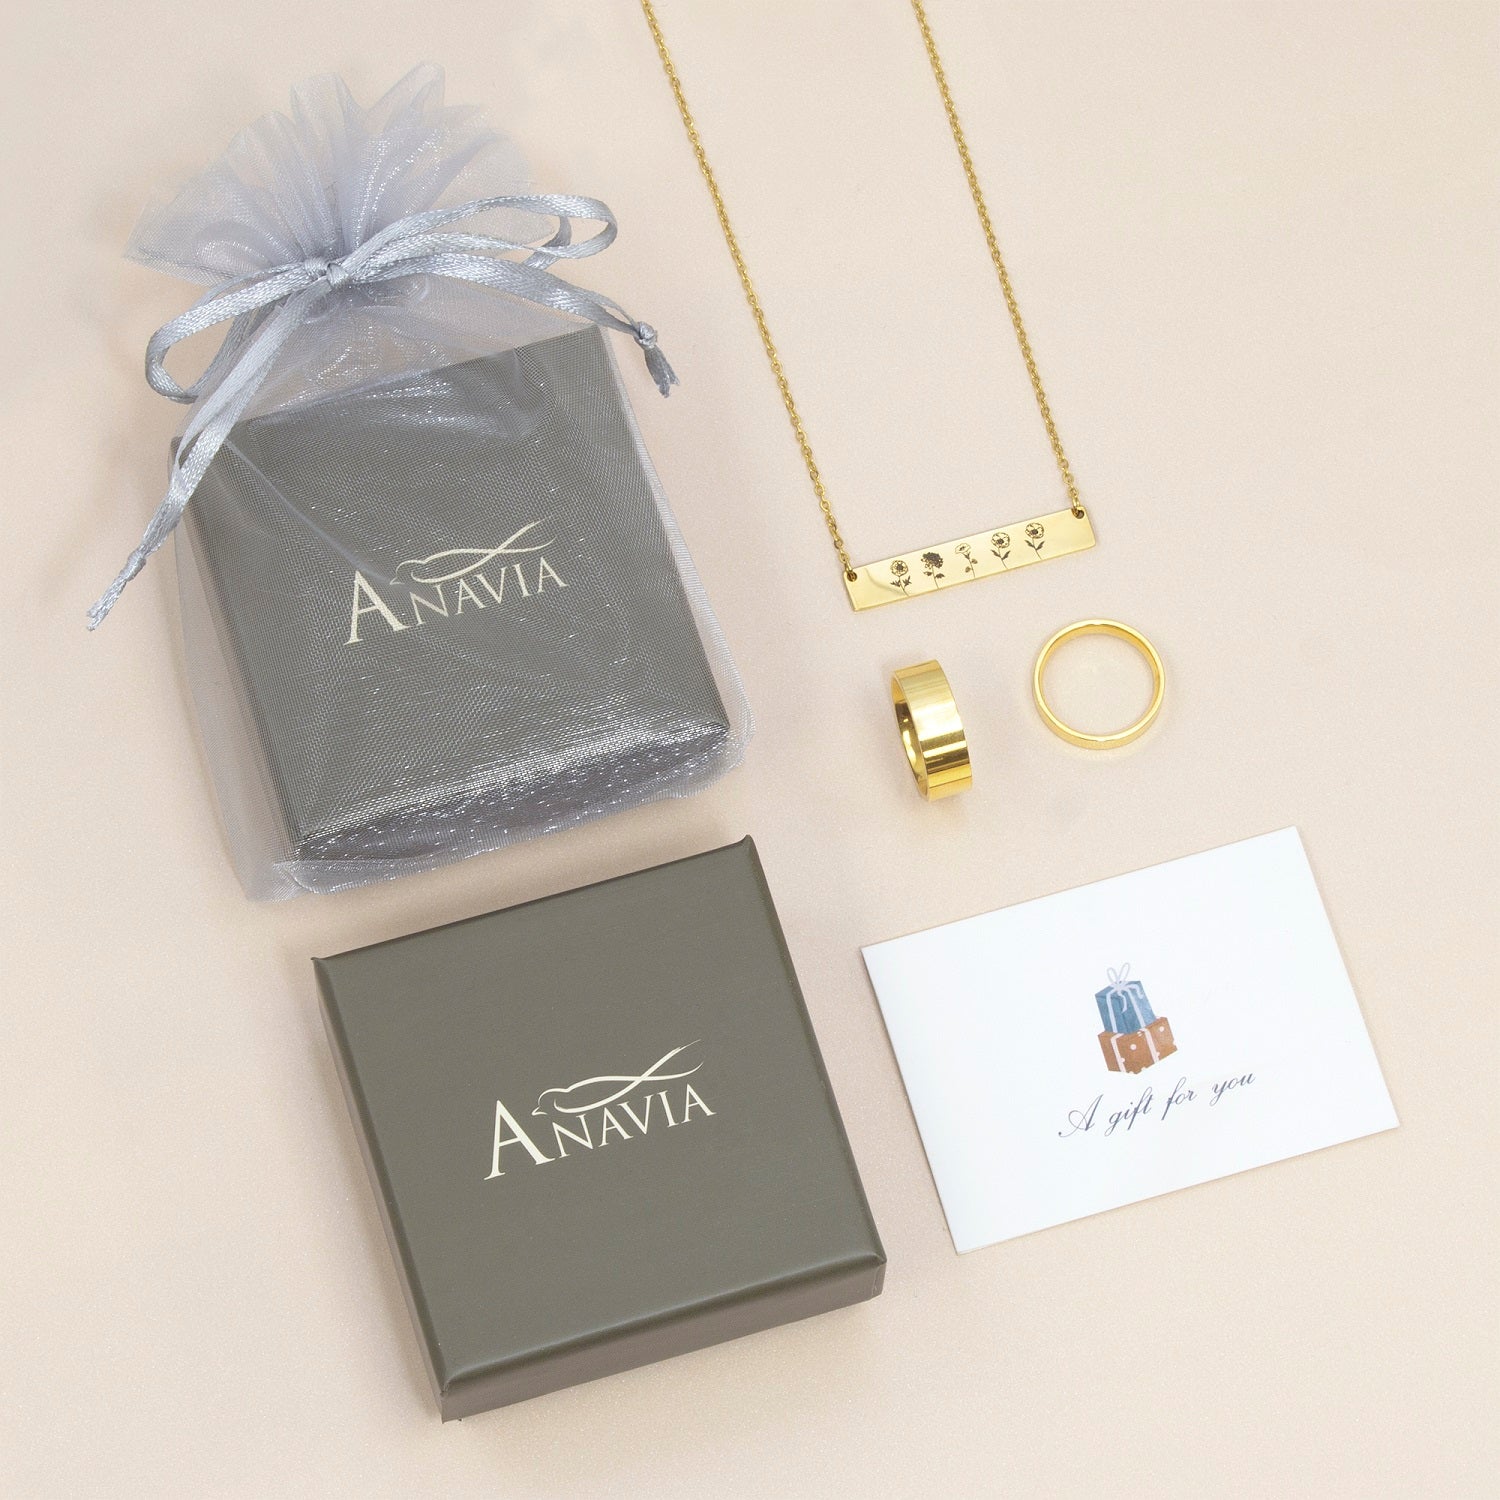 Anavia Best Friend Necklace, Friendship Jewelry, Best Friend Gifts, Gift for Friend, Birthday Gift, Christmas Gift for Her, Cube Pendant Necklace with